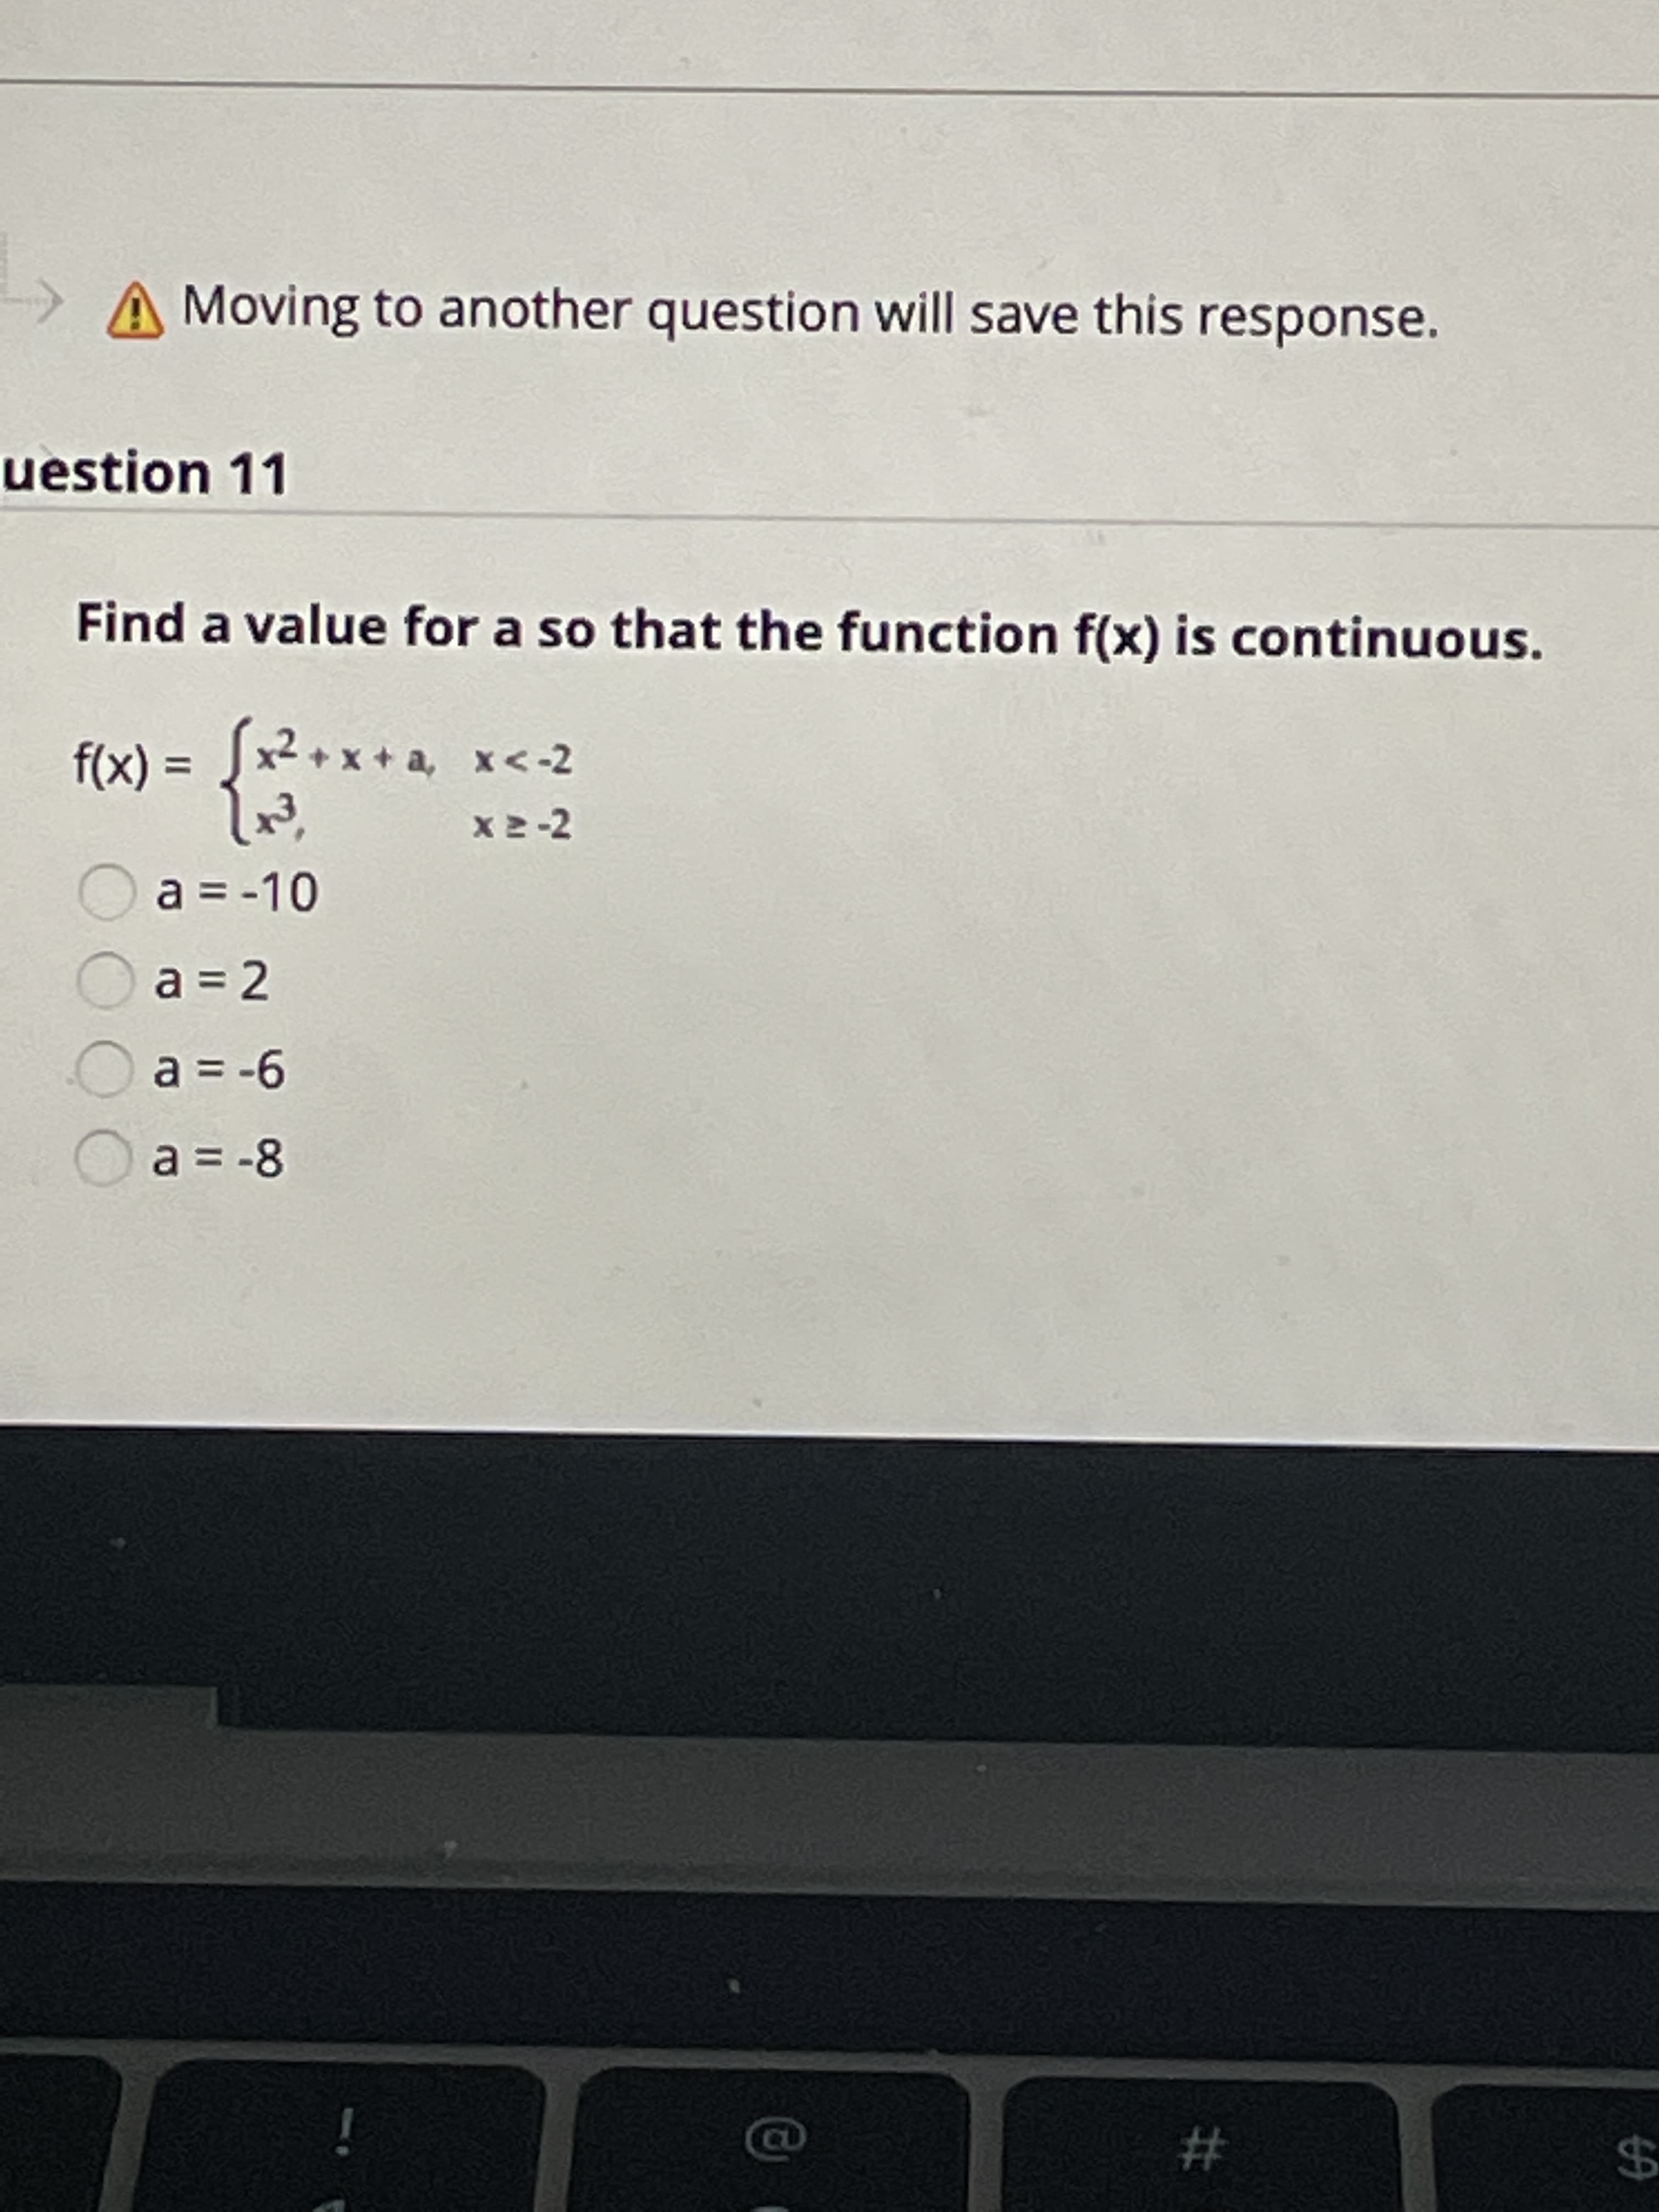 %24
A Moving to another question will save this response.
uestion 11
Find a value for a so that the function f(x) is continuous.
x2 + x + a, x<-2
%3D
= (X)
X2-2
a = -10
a = 2
9- 3D6
a = -8
i
#
